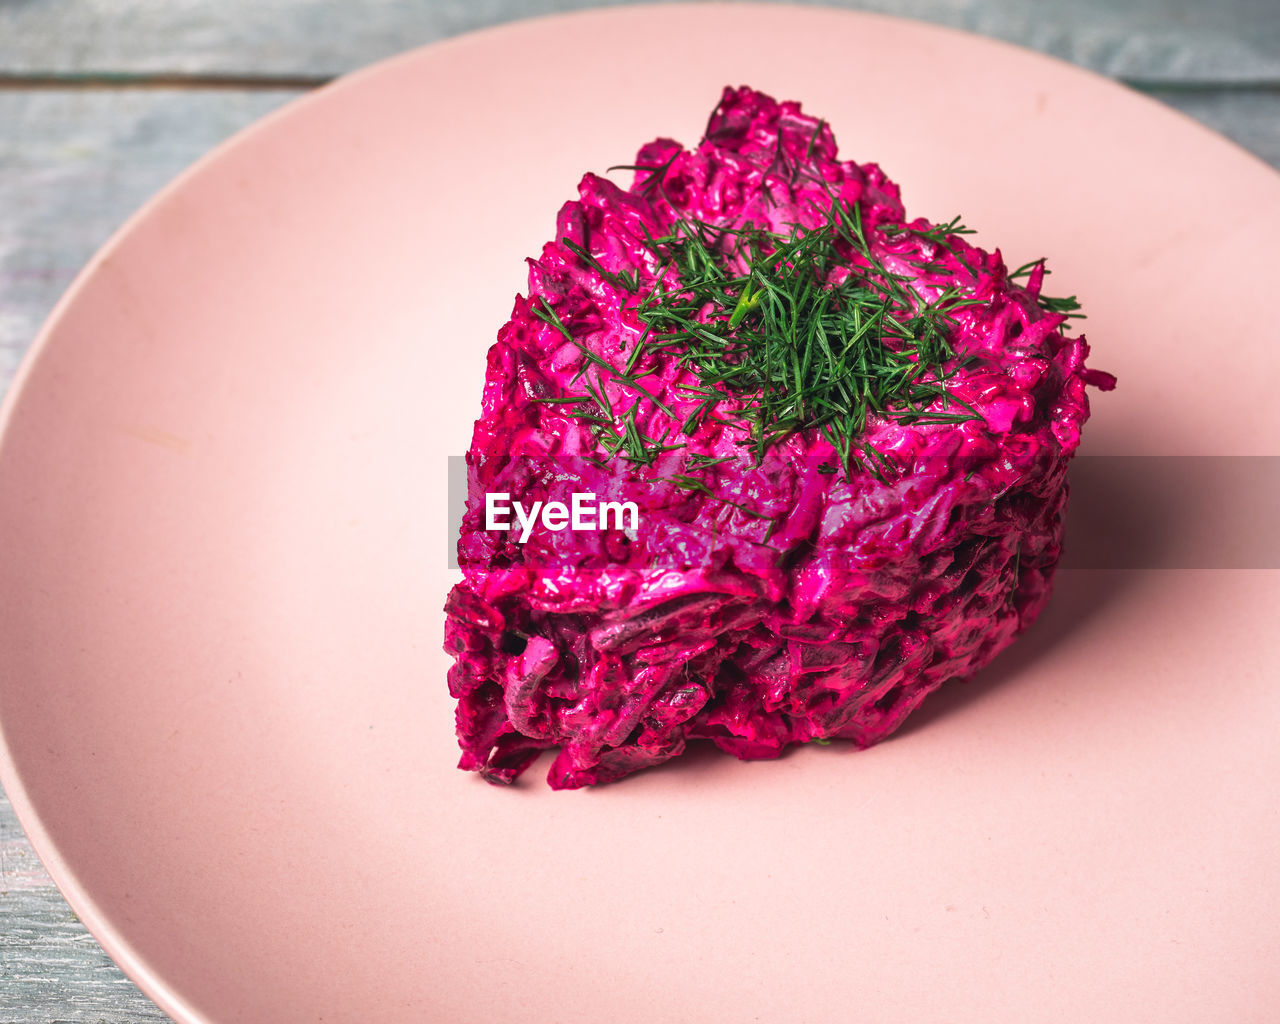 Beetroot salad with feta cheese and dill on a pink plate, breakfast for valentine's day